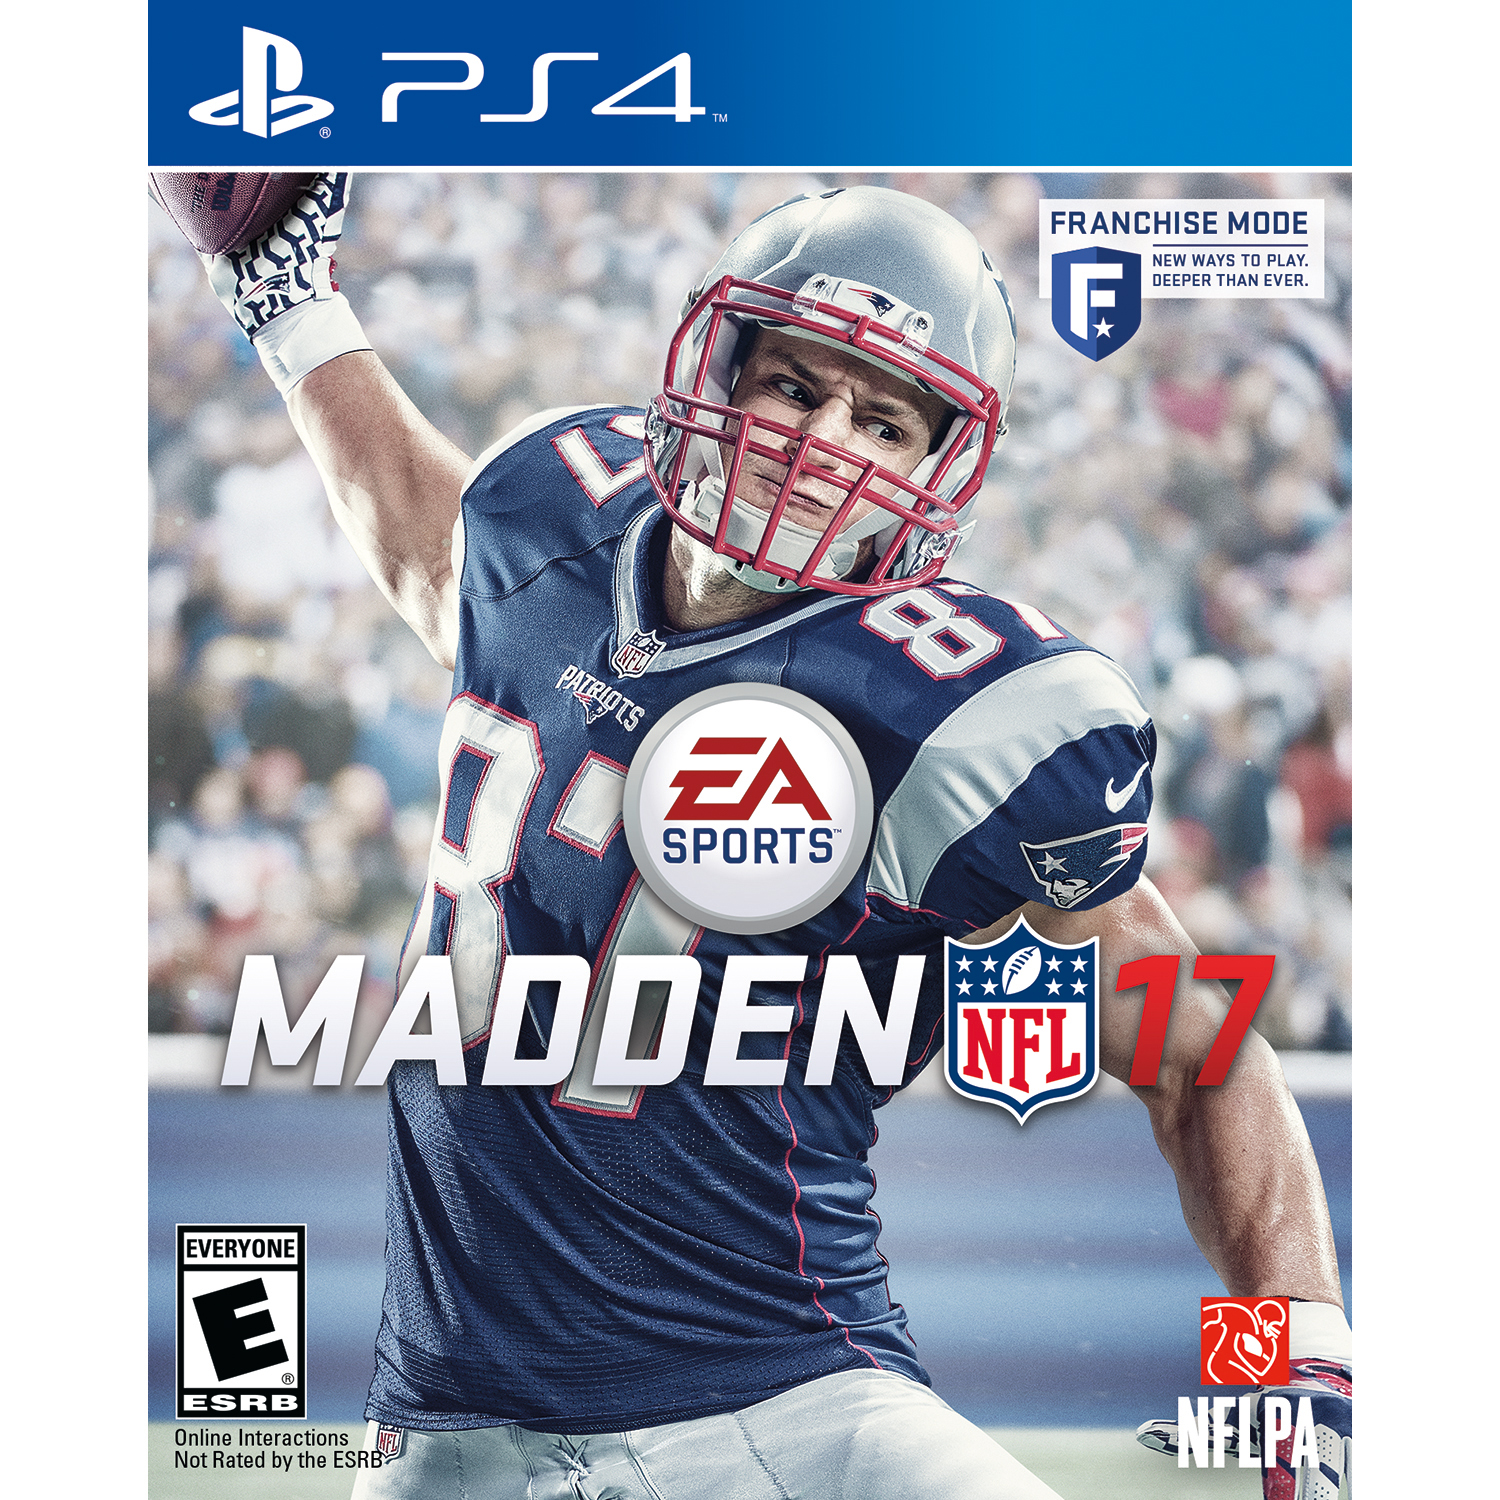 Madden NFL 17, Electronic Arts, PlayStation 4, 014633368574 - image 1 of 12